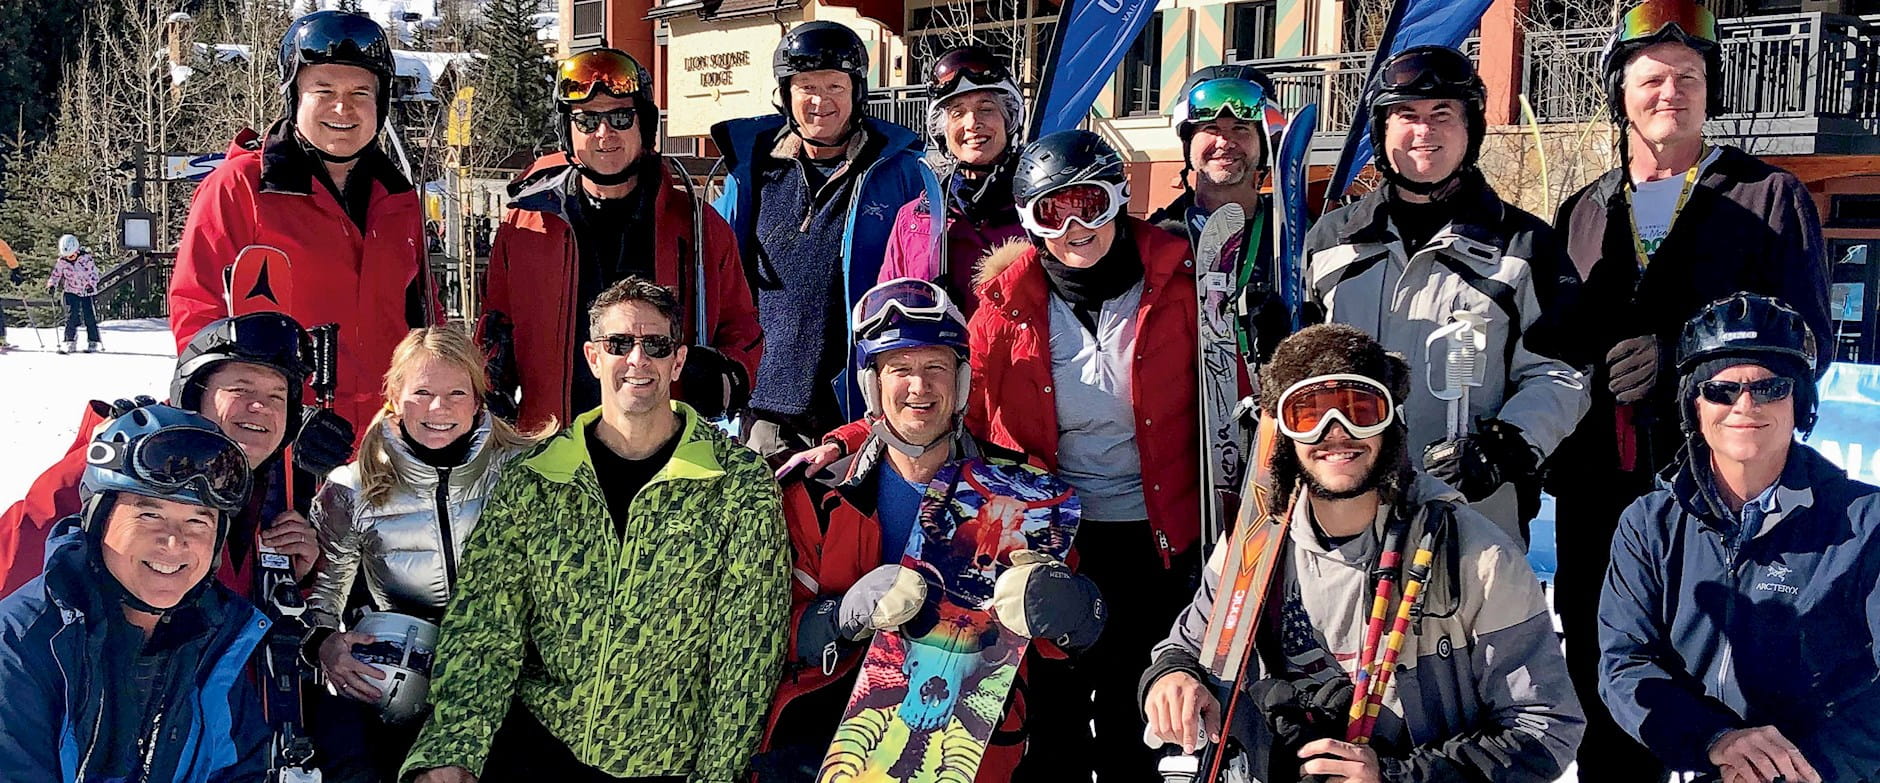 Chicago Booth alumni on the annual group ski trip